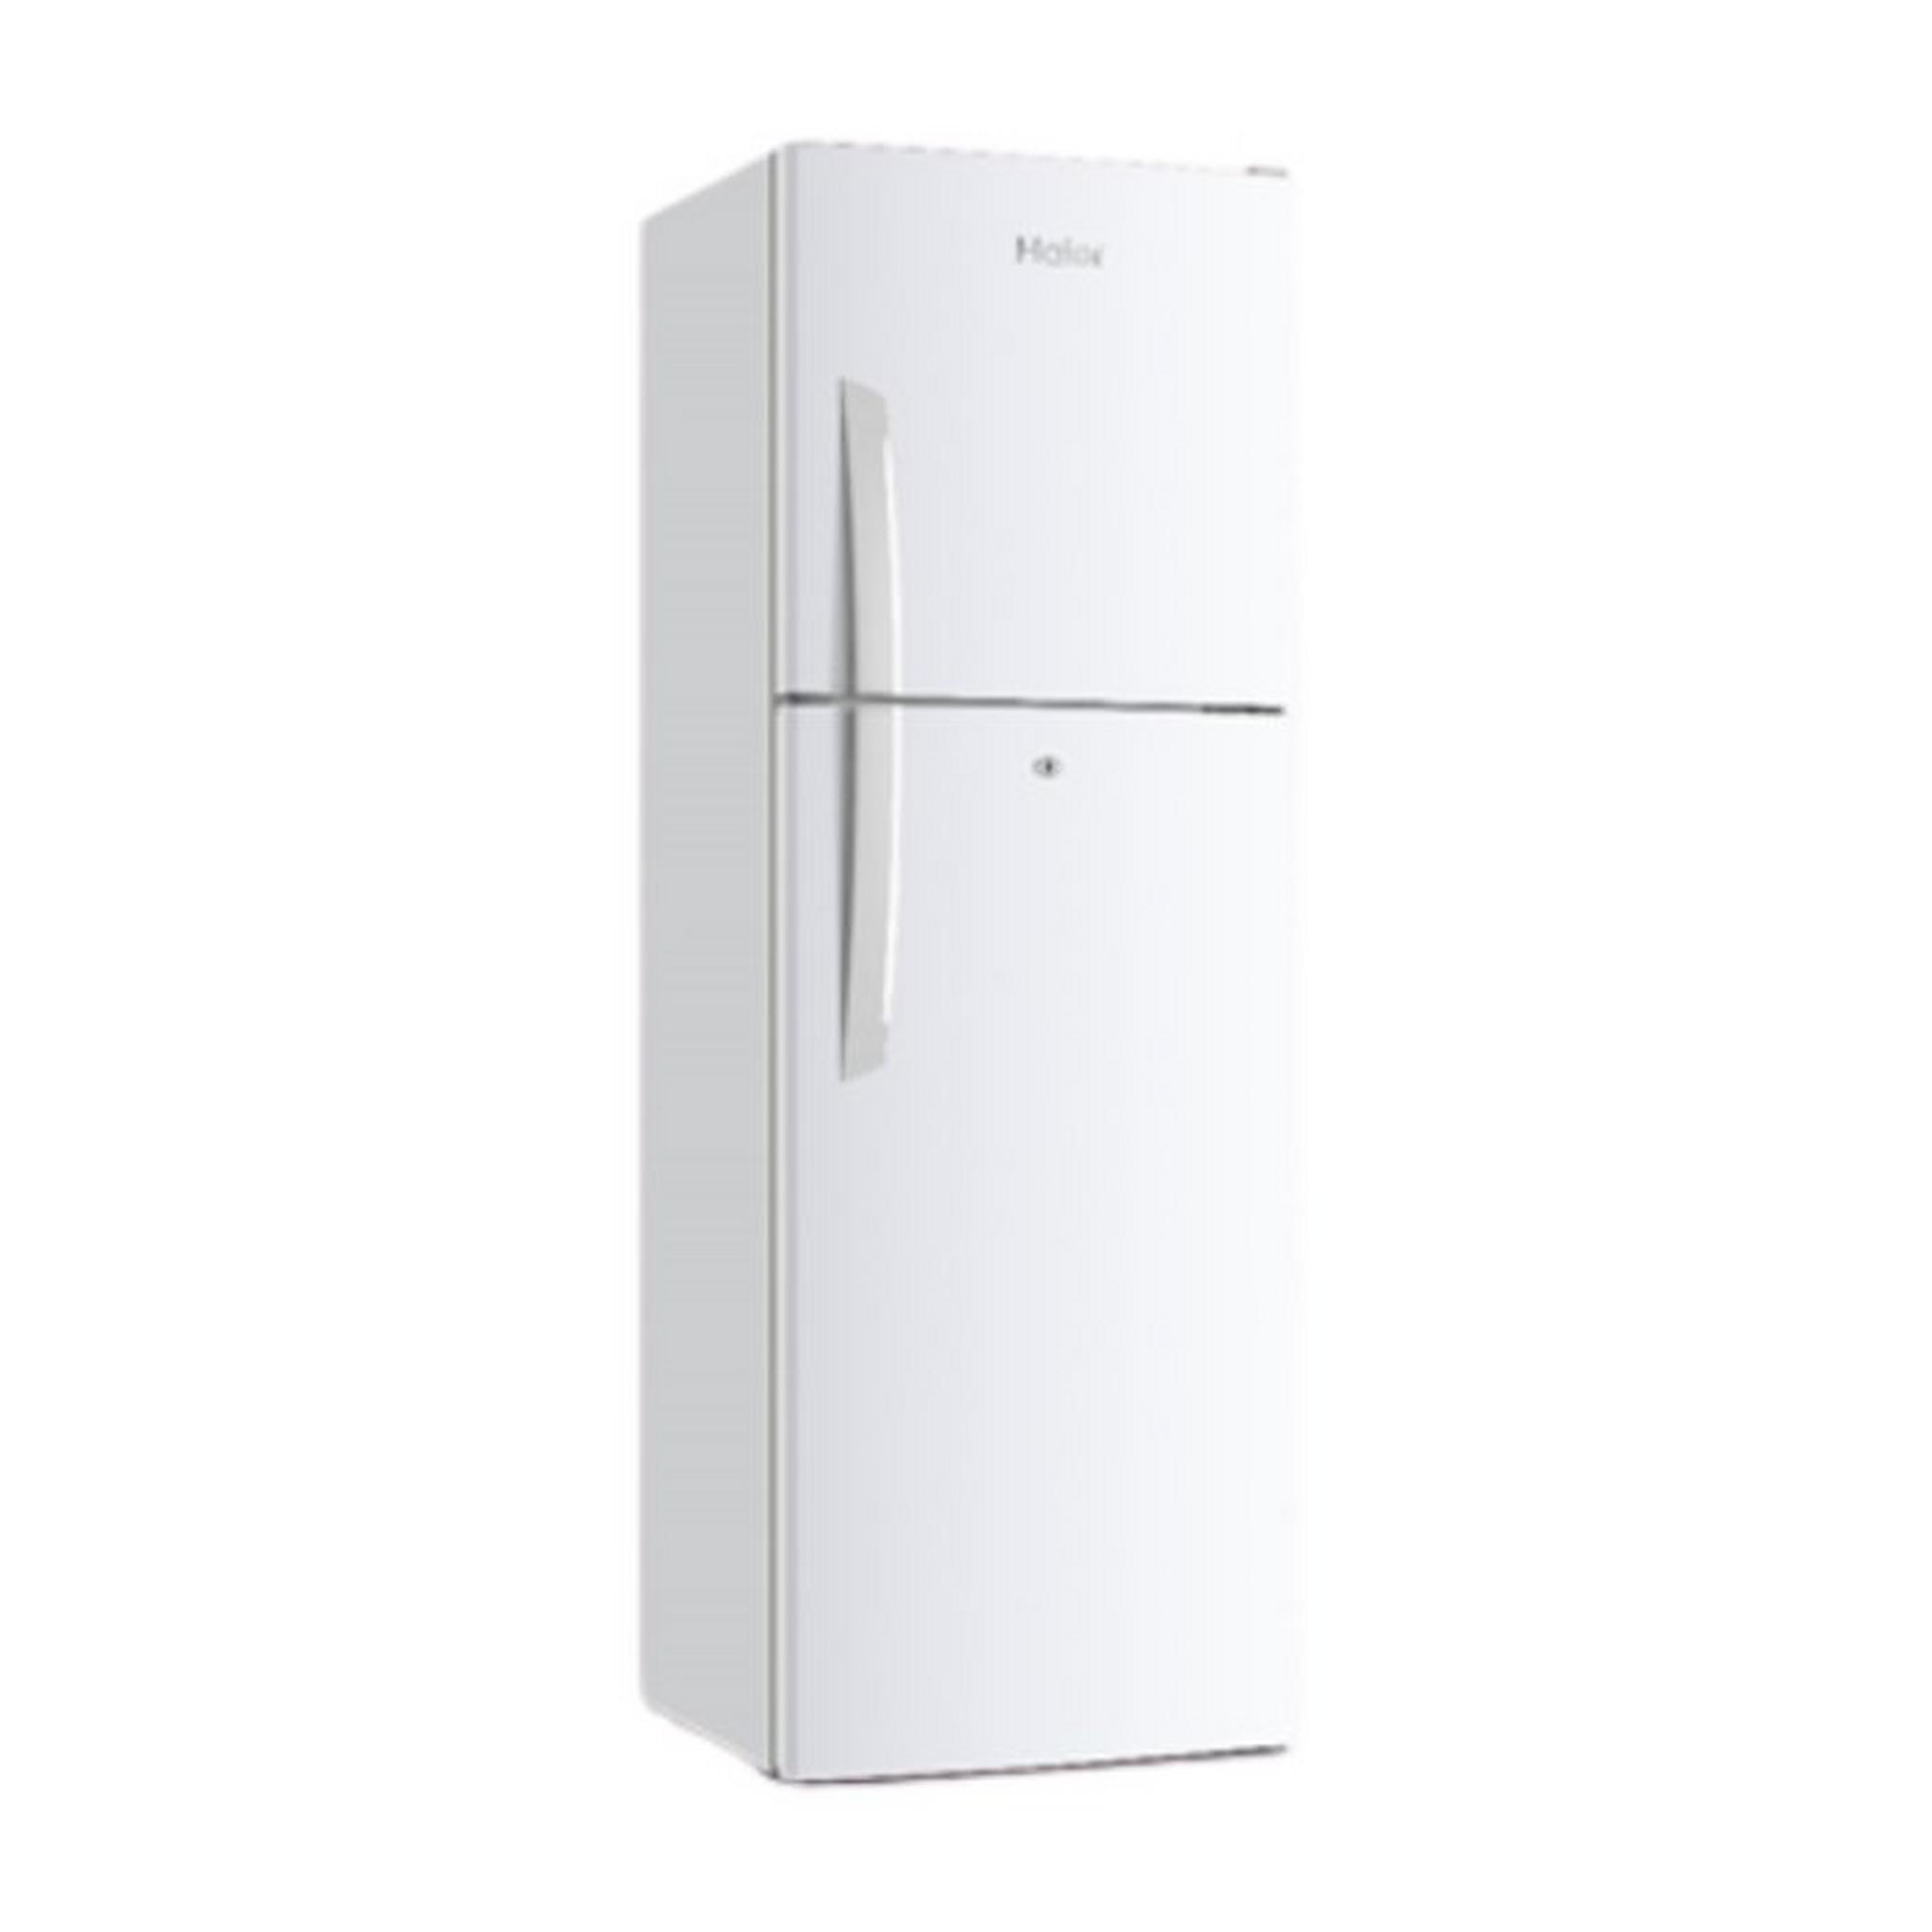 Haier 11CFT Top Mount Refrigerator (HRF-310WH)